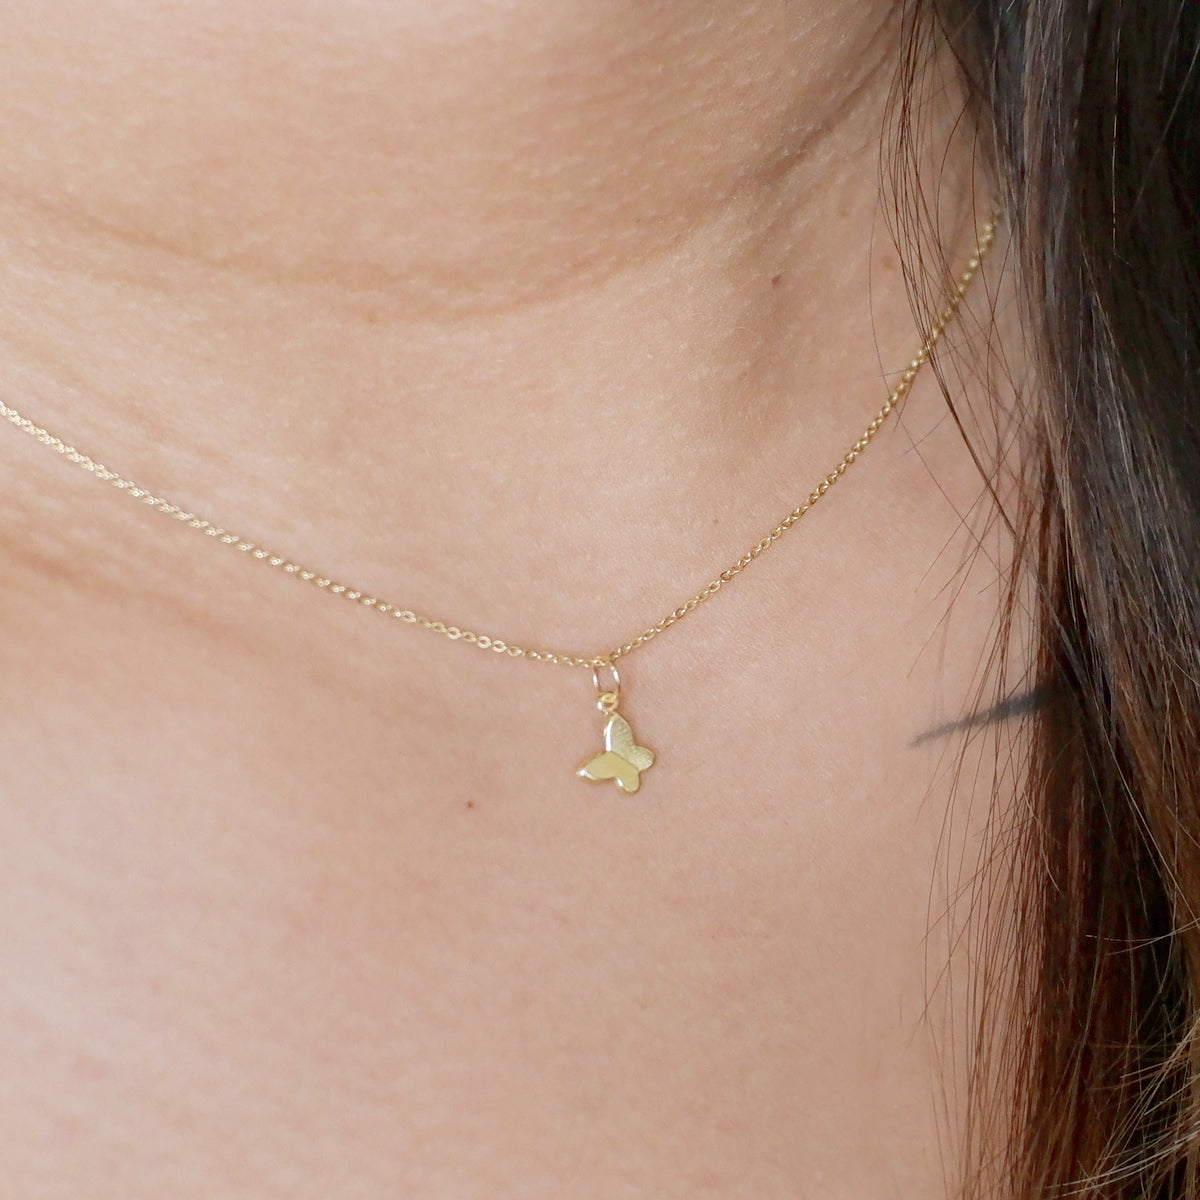 The Flat Butterfly Charm in Solid Gold